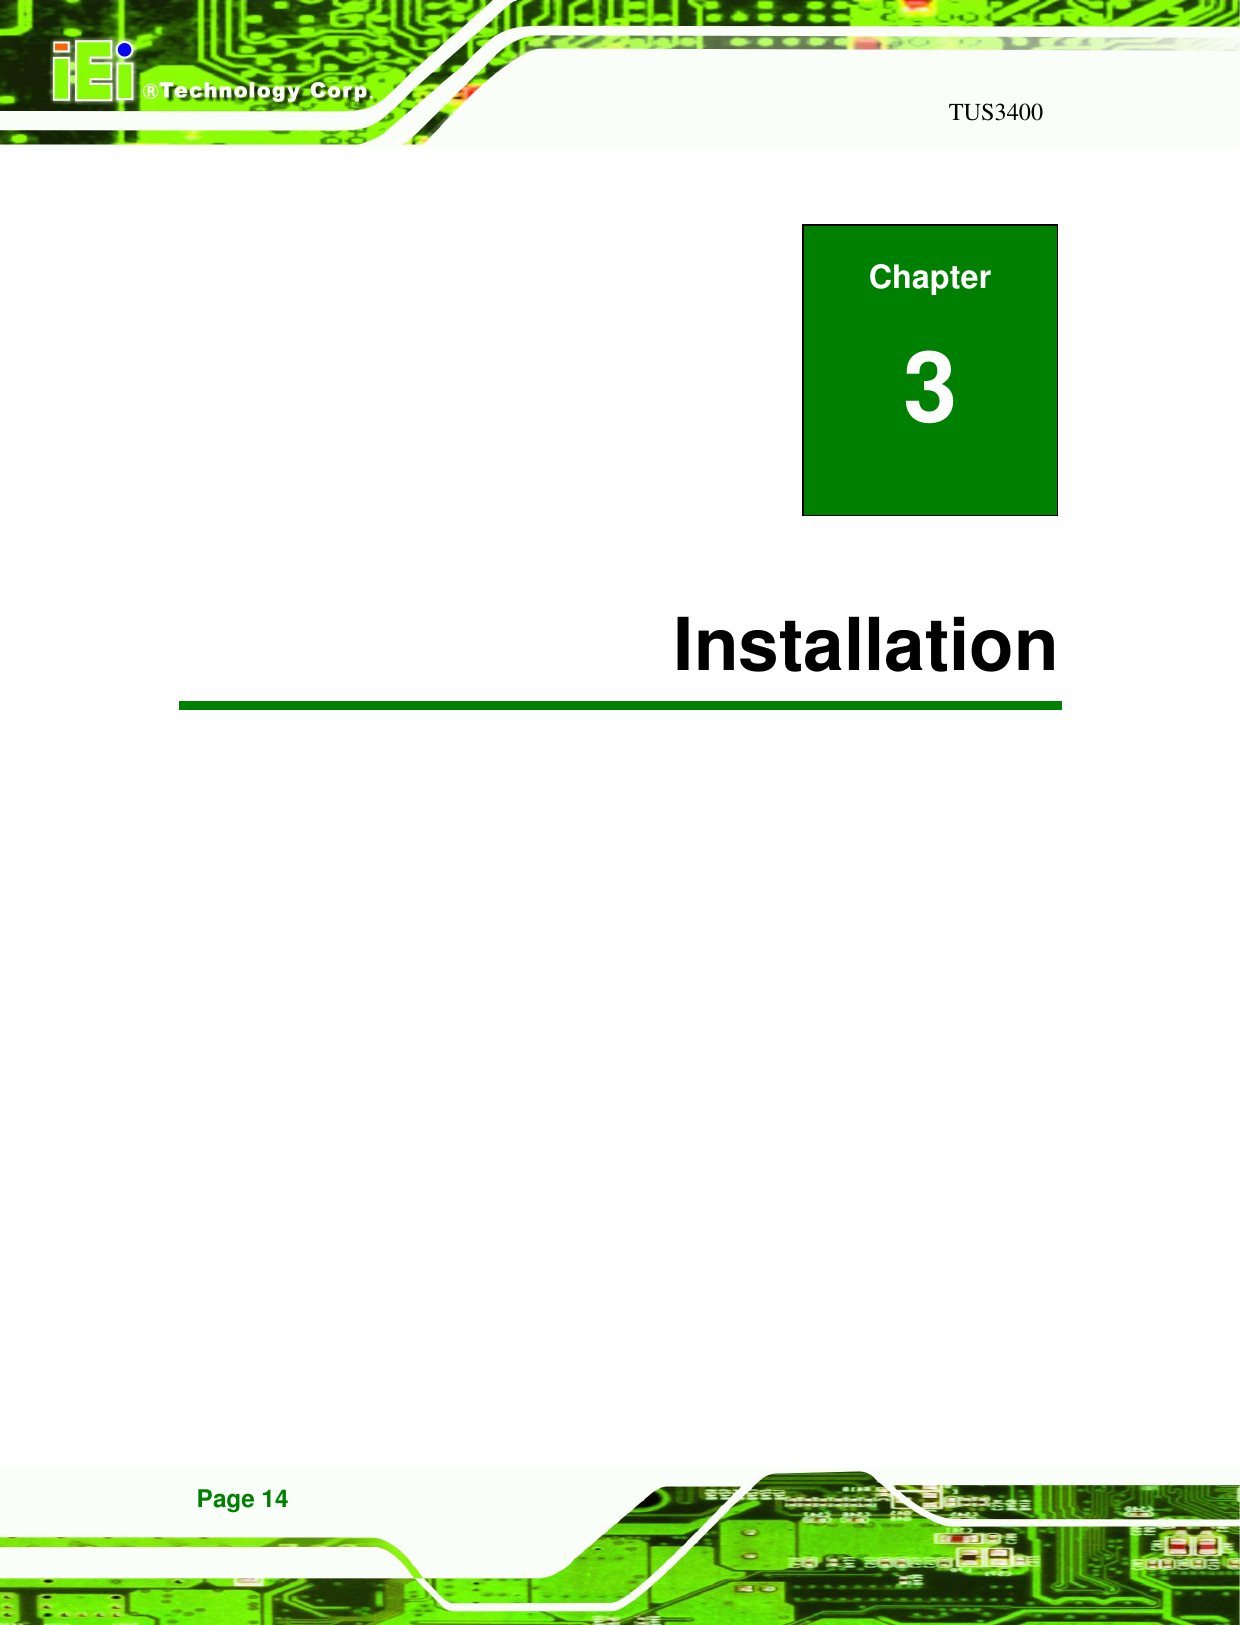   TUS3400 Page 14            3 Installation  Chapter 3 